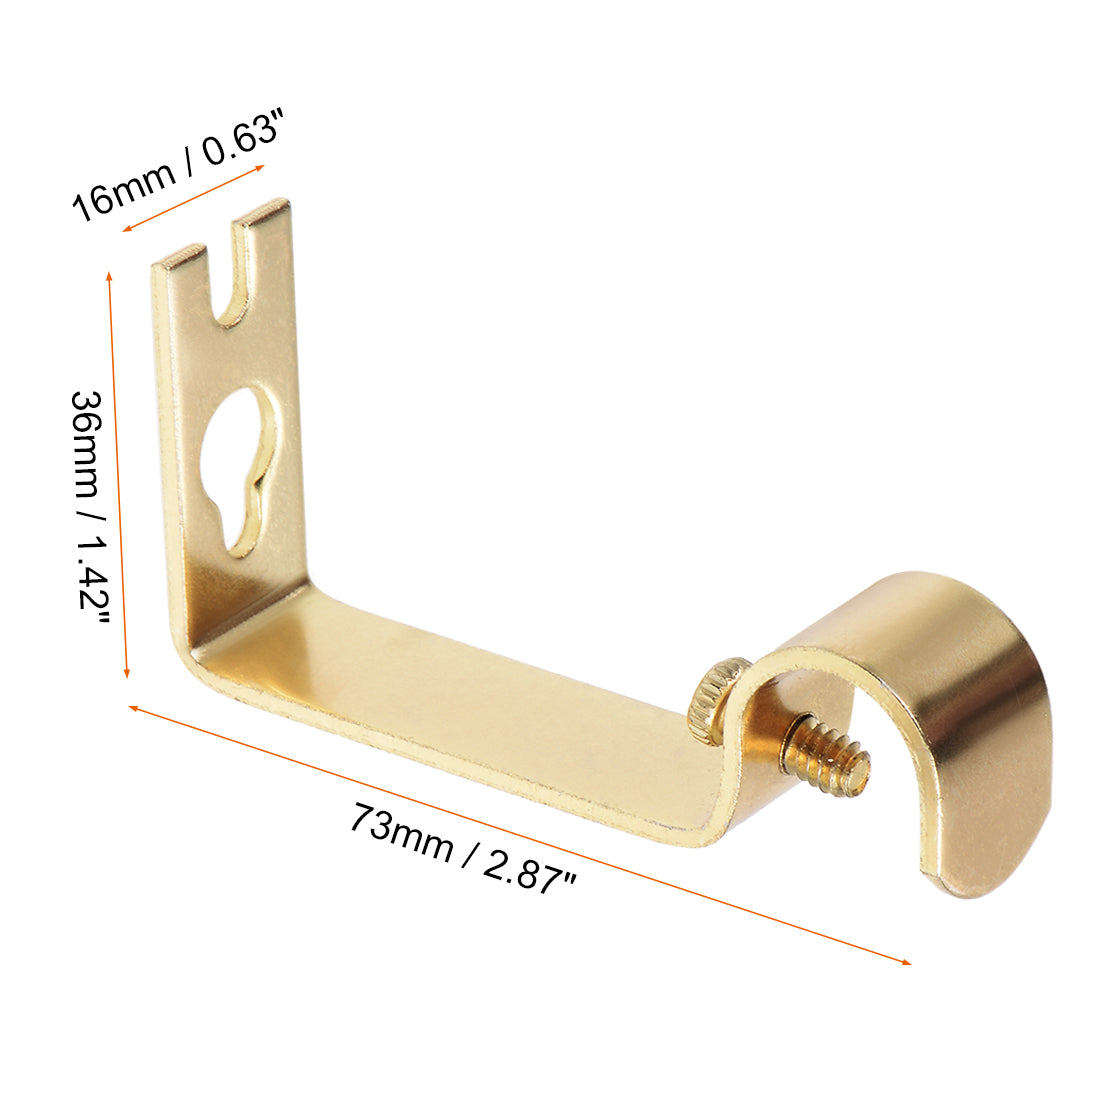 uxcell Uxcell Curtain Rod Bracket Iron Single Holder Support for 16mm Drapery Rod, 73 x 36 x 16mm Gold Tone 2Pcs